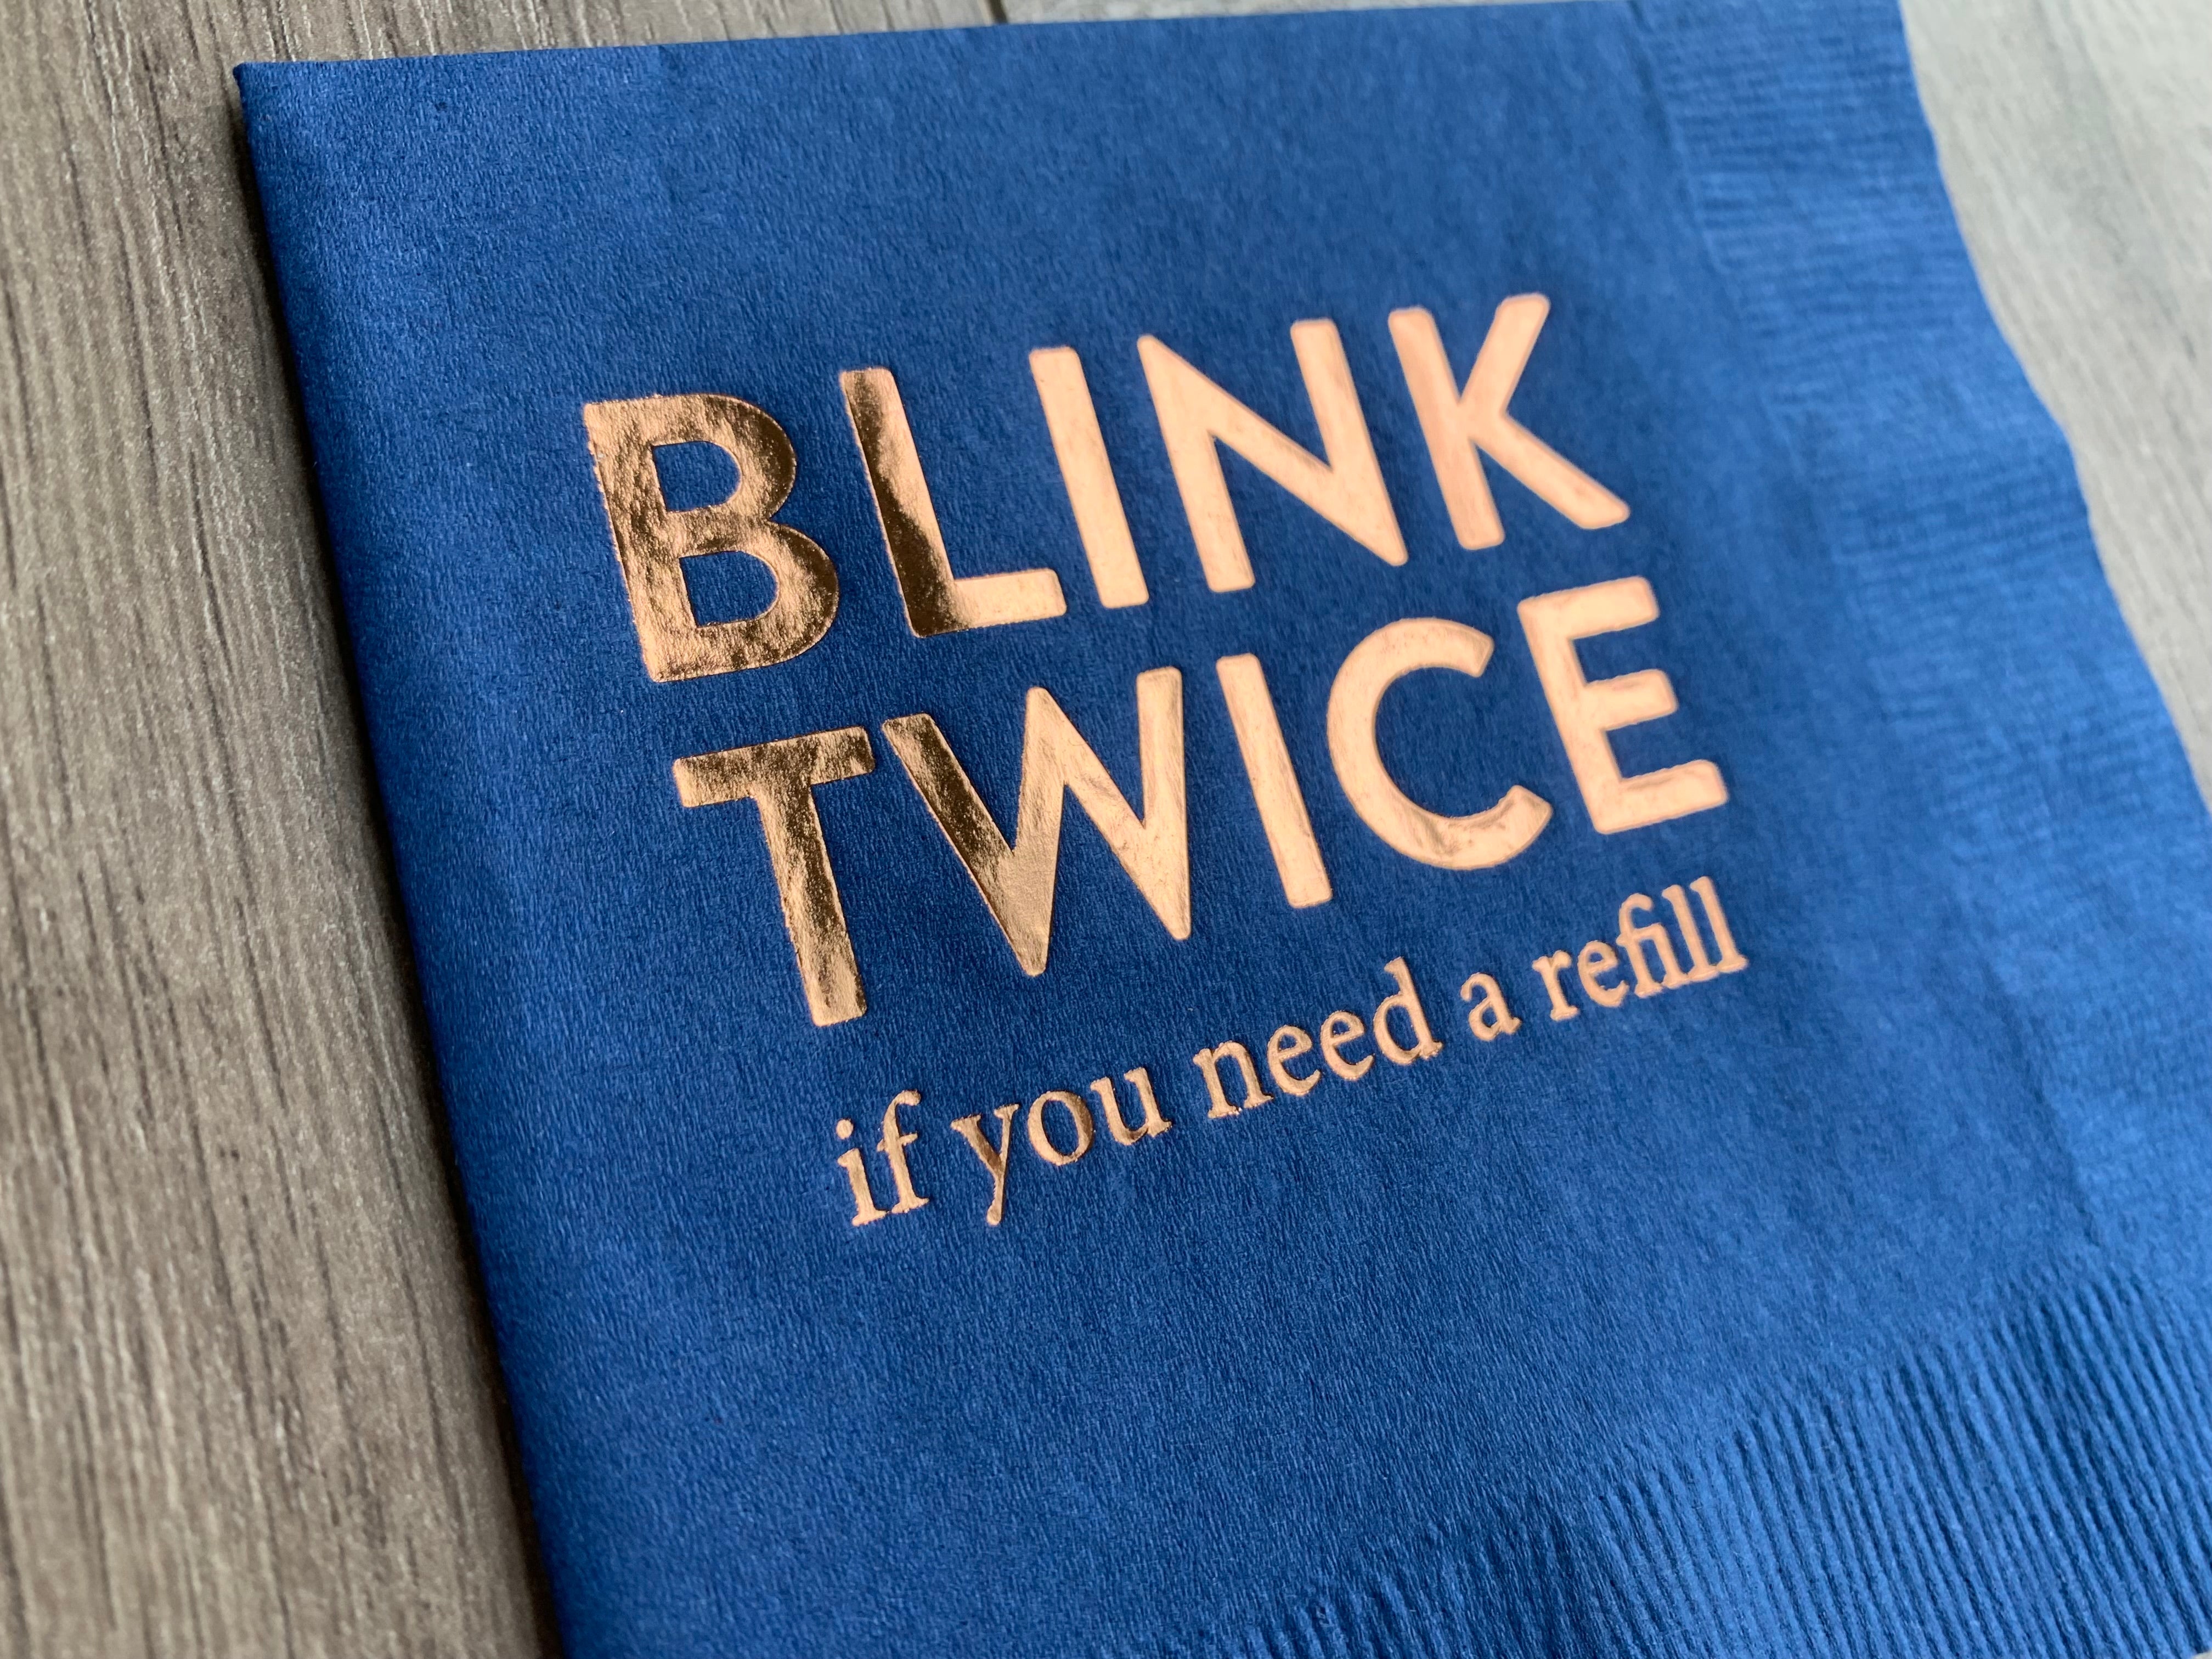 closeup of the metallic gold foil on a navy cocktail napkin that reads - blink twice if you need a refill. The napkin is slightly angled while lying on a gray wooden bakcground.